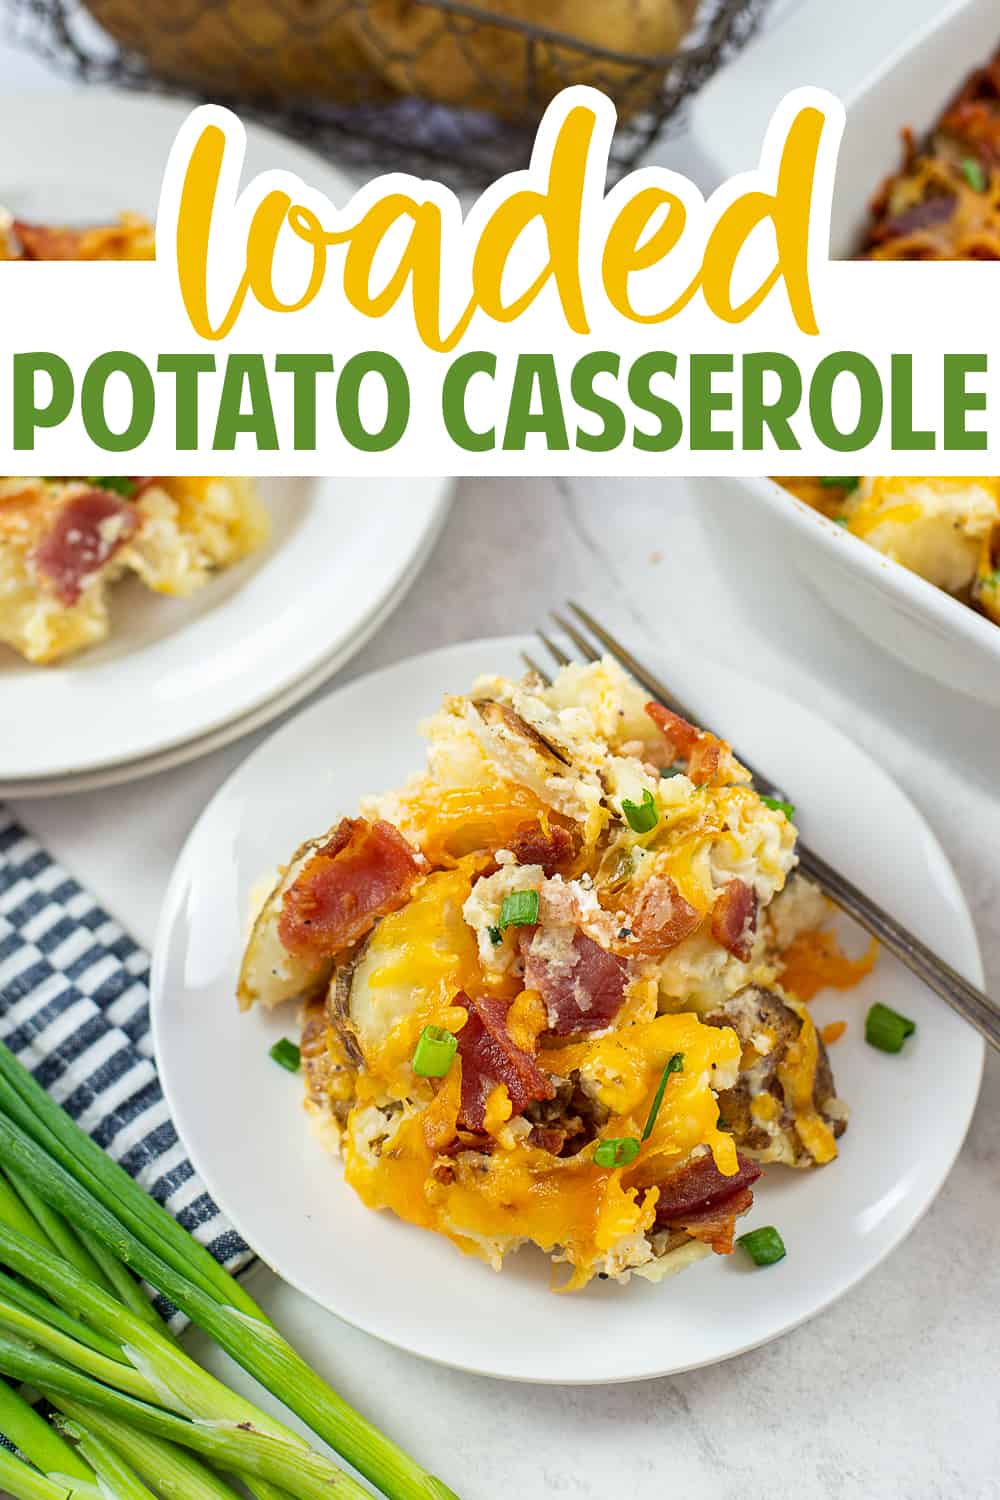 loaded potato casserole on white plate with text for Pinterest.